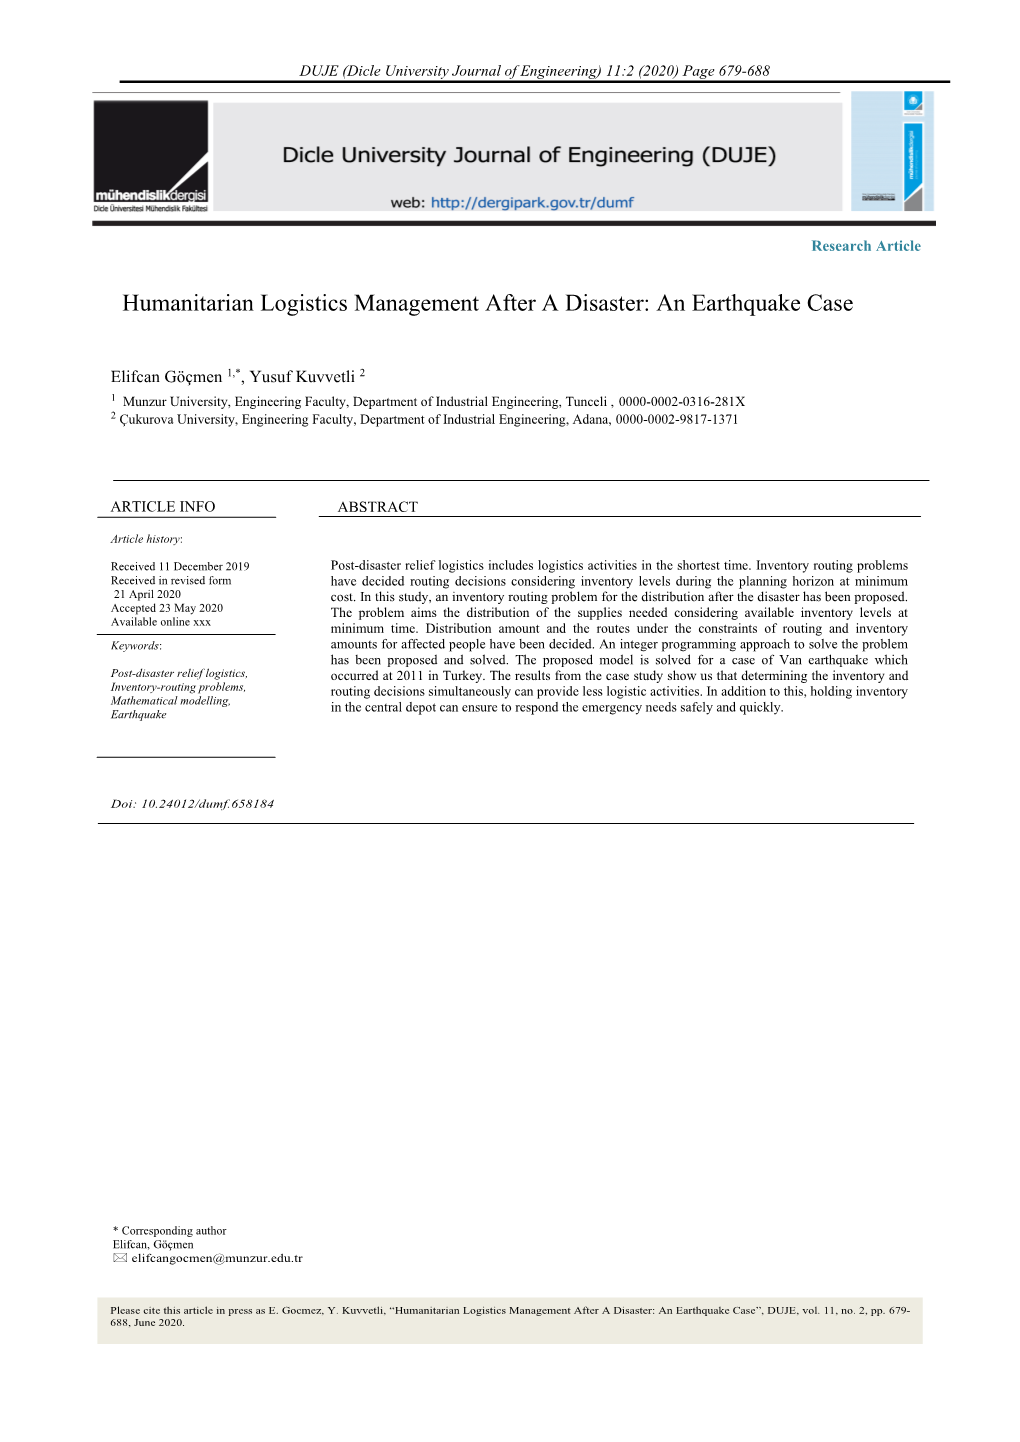 Humanitarian Logistics Management After a Disaster: an Earthquake Case